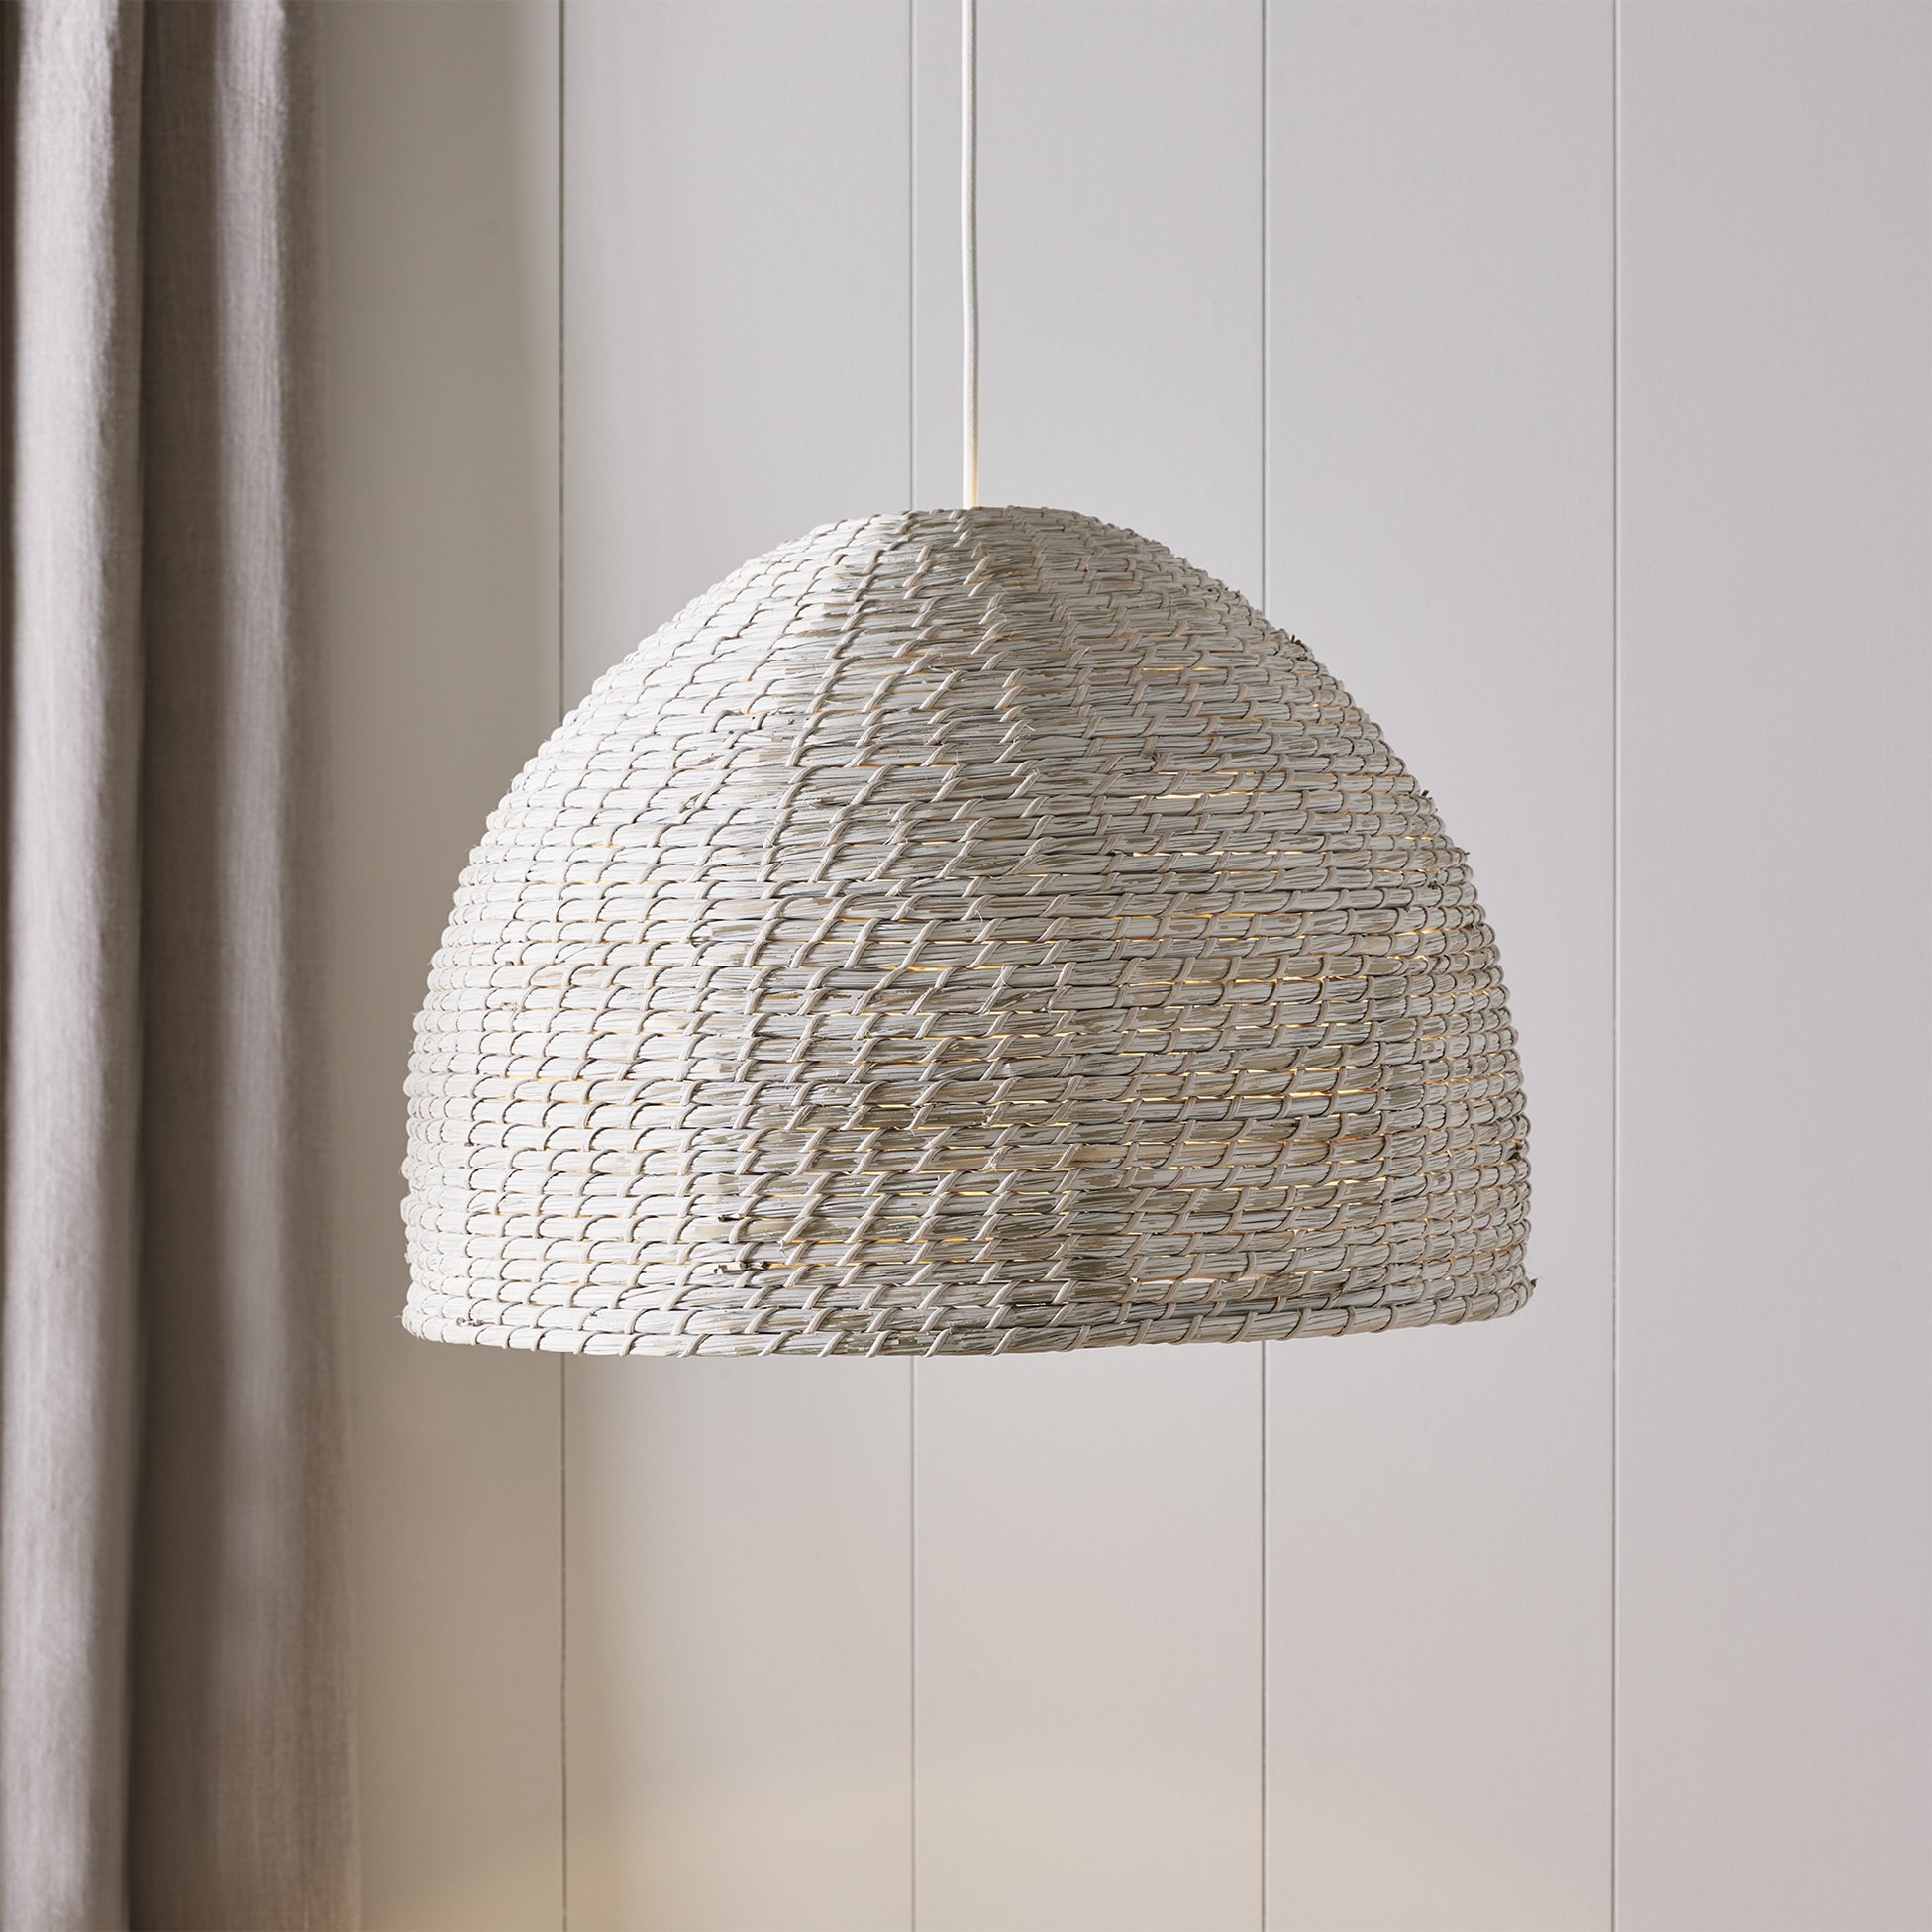 Mawes Ceiling Shade Lights, Large White Wicker Lampshade